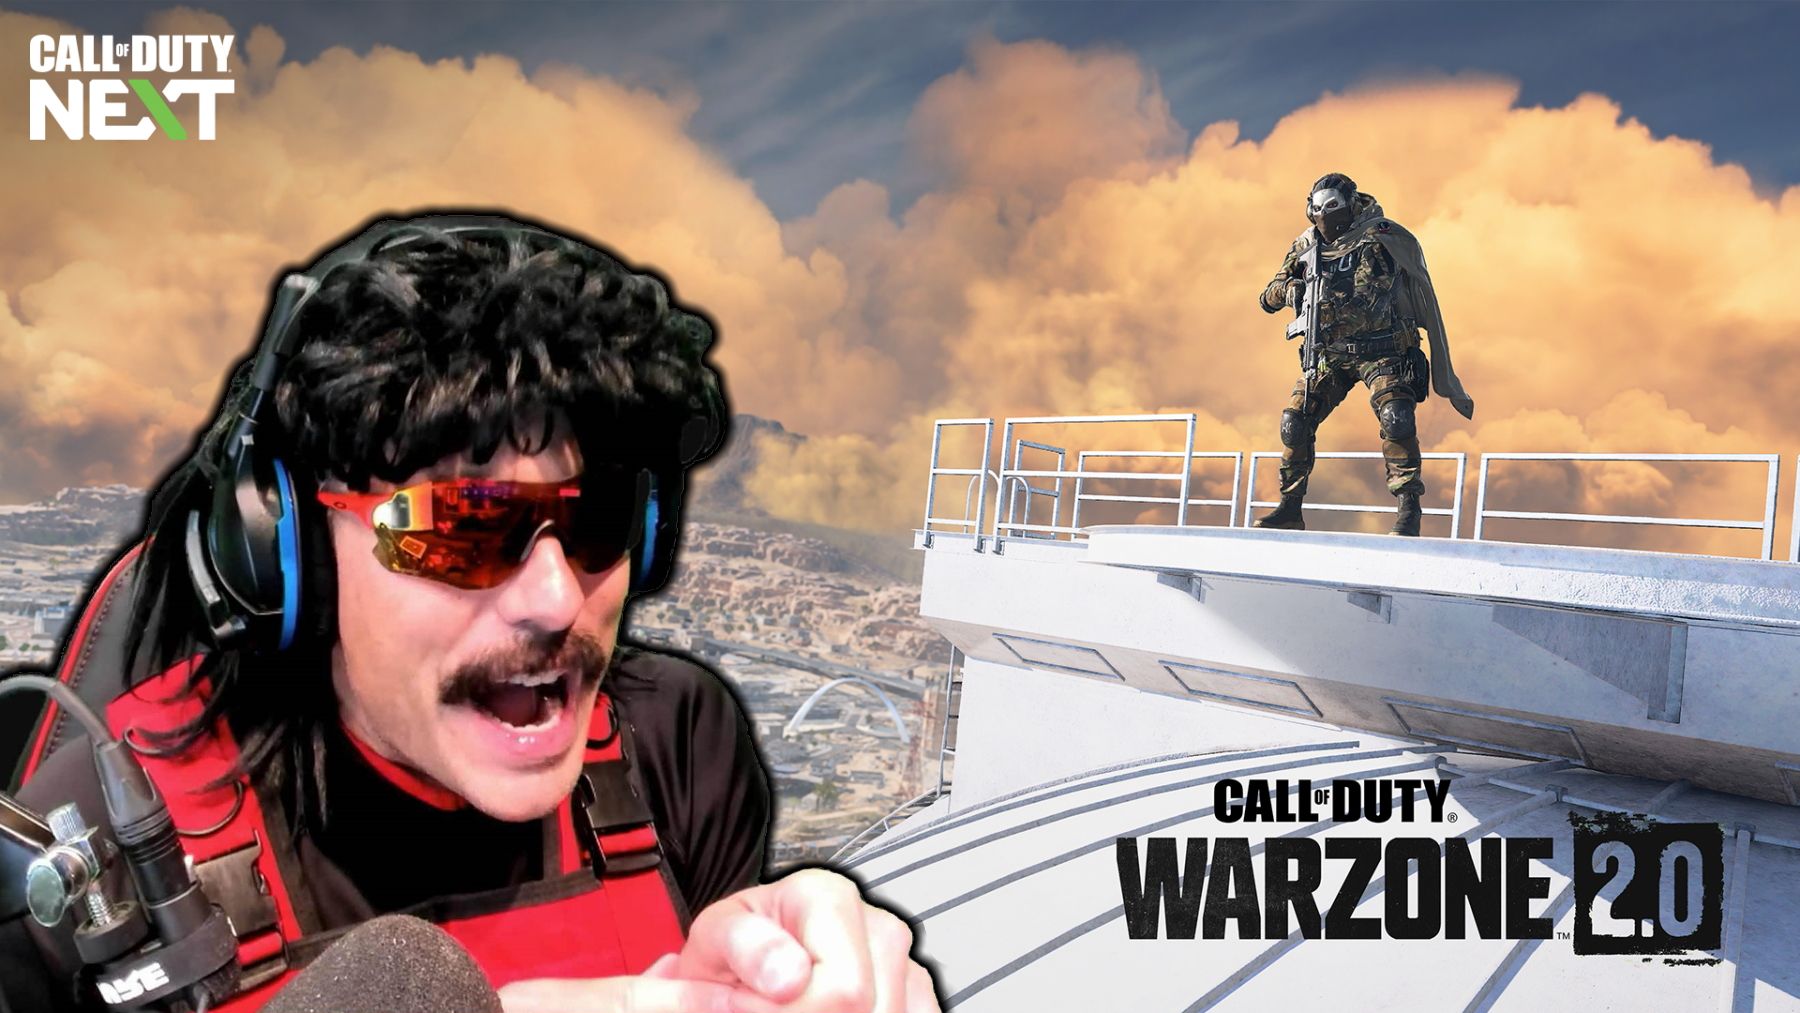 Dr Disrespect Reveals Call of Duty Did Not Invite Him to
Warzone 2 Creator Event